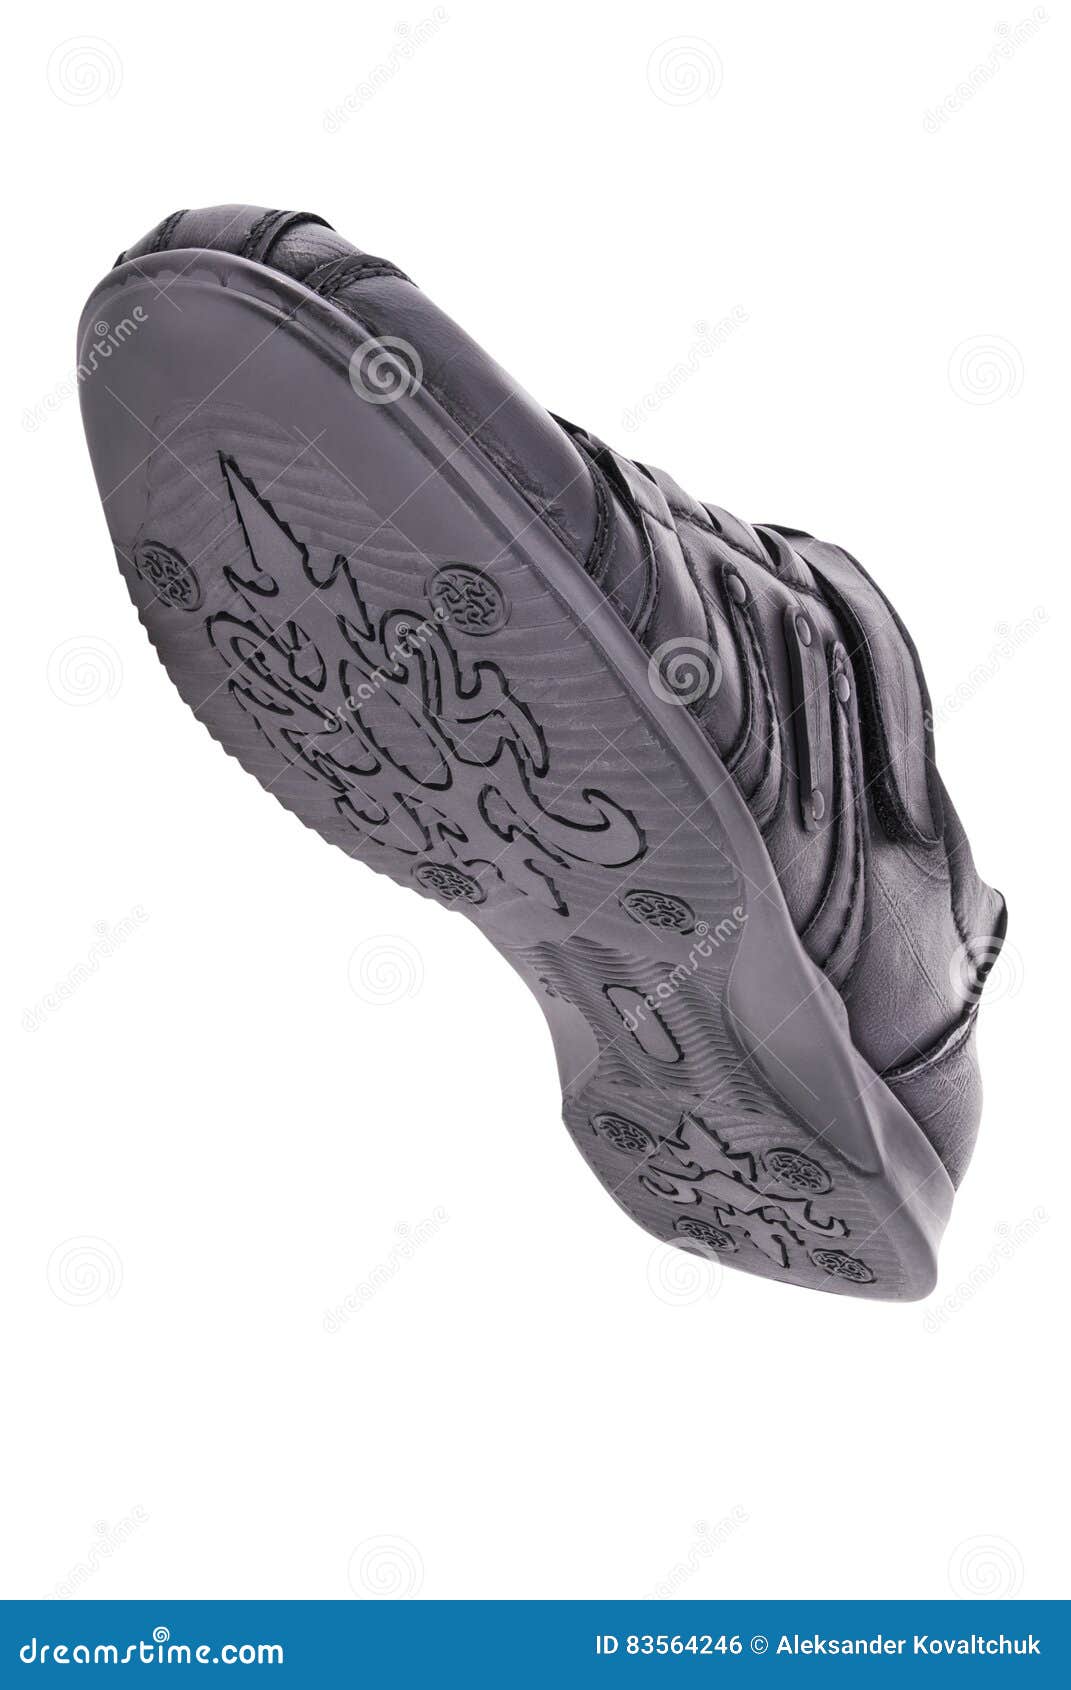 the bottom of a shoe